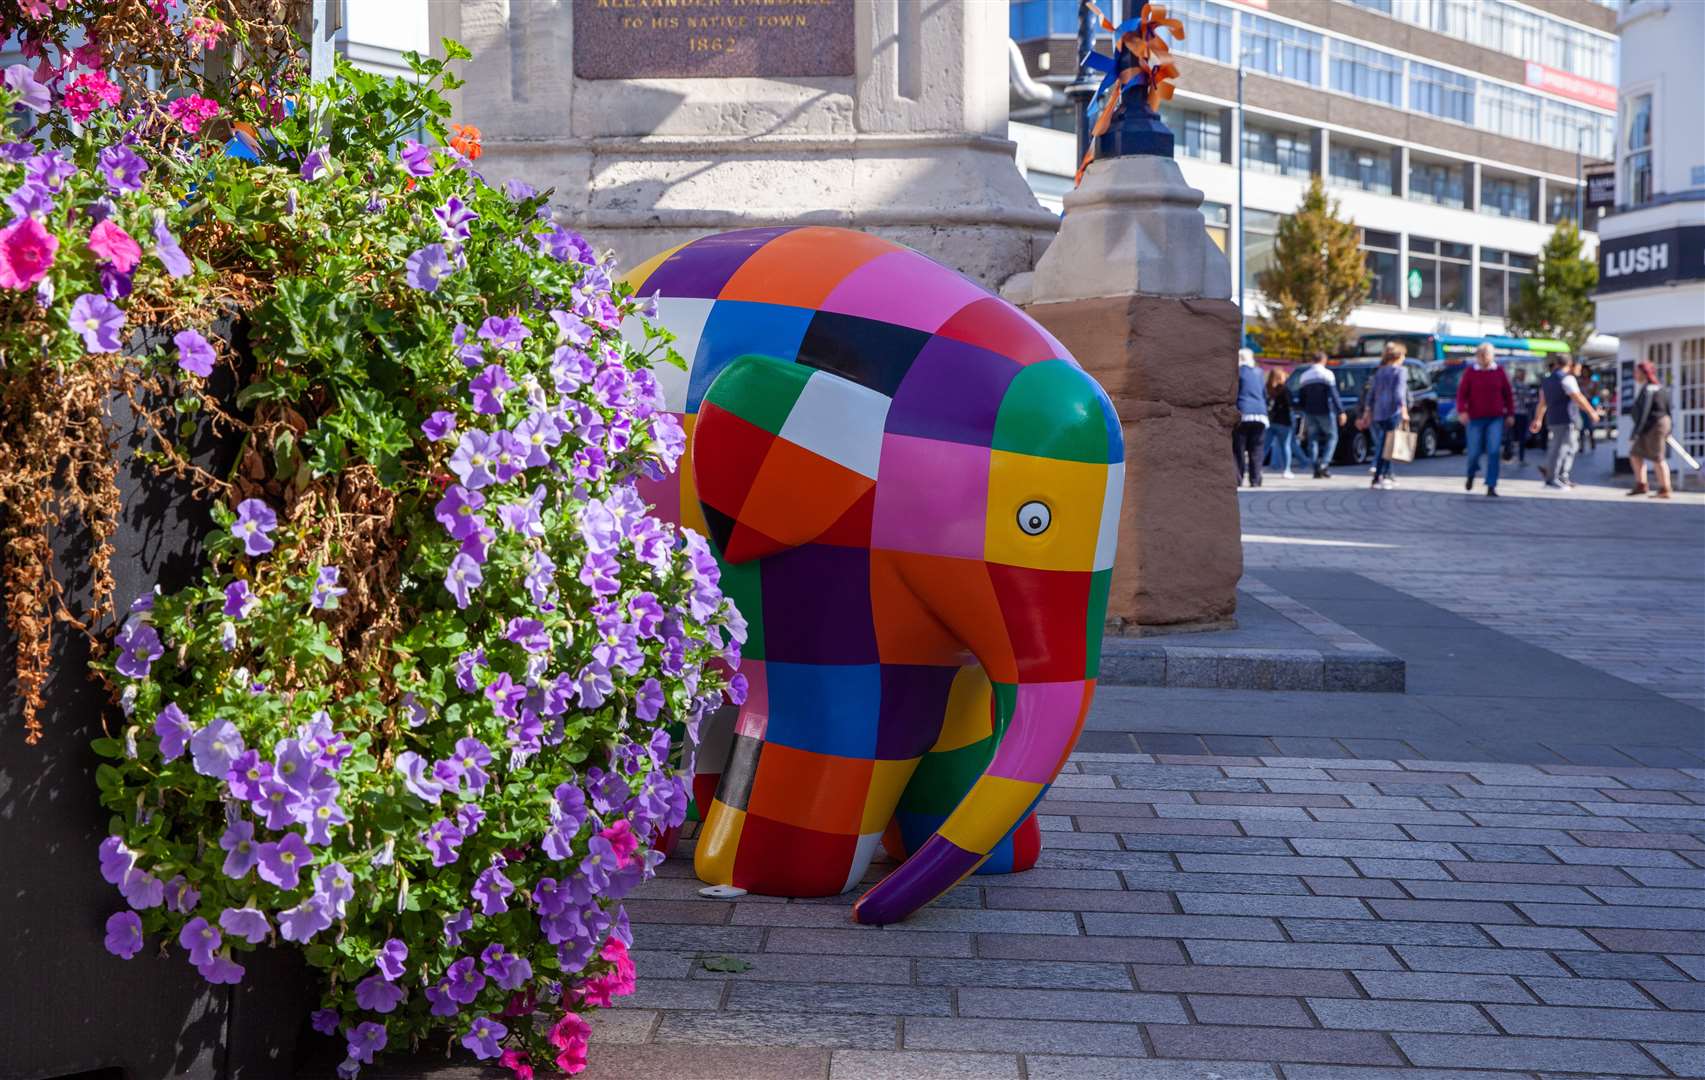 Elmer’s Big Heart of Kent Parade will be springing up this weekend